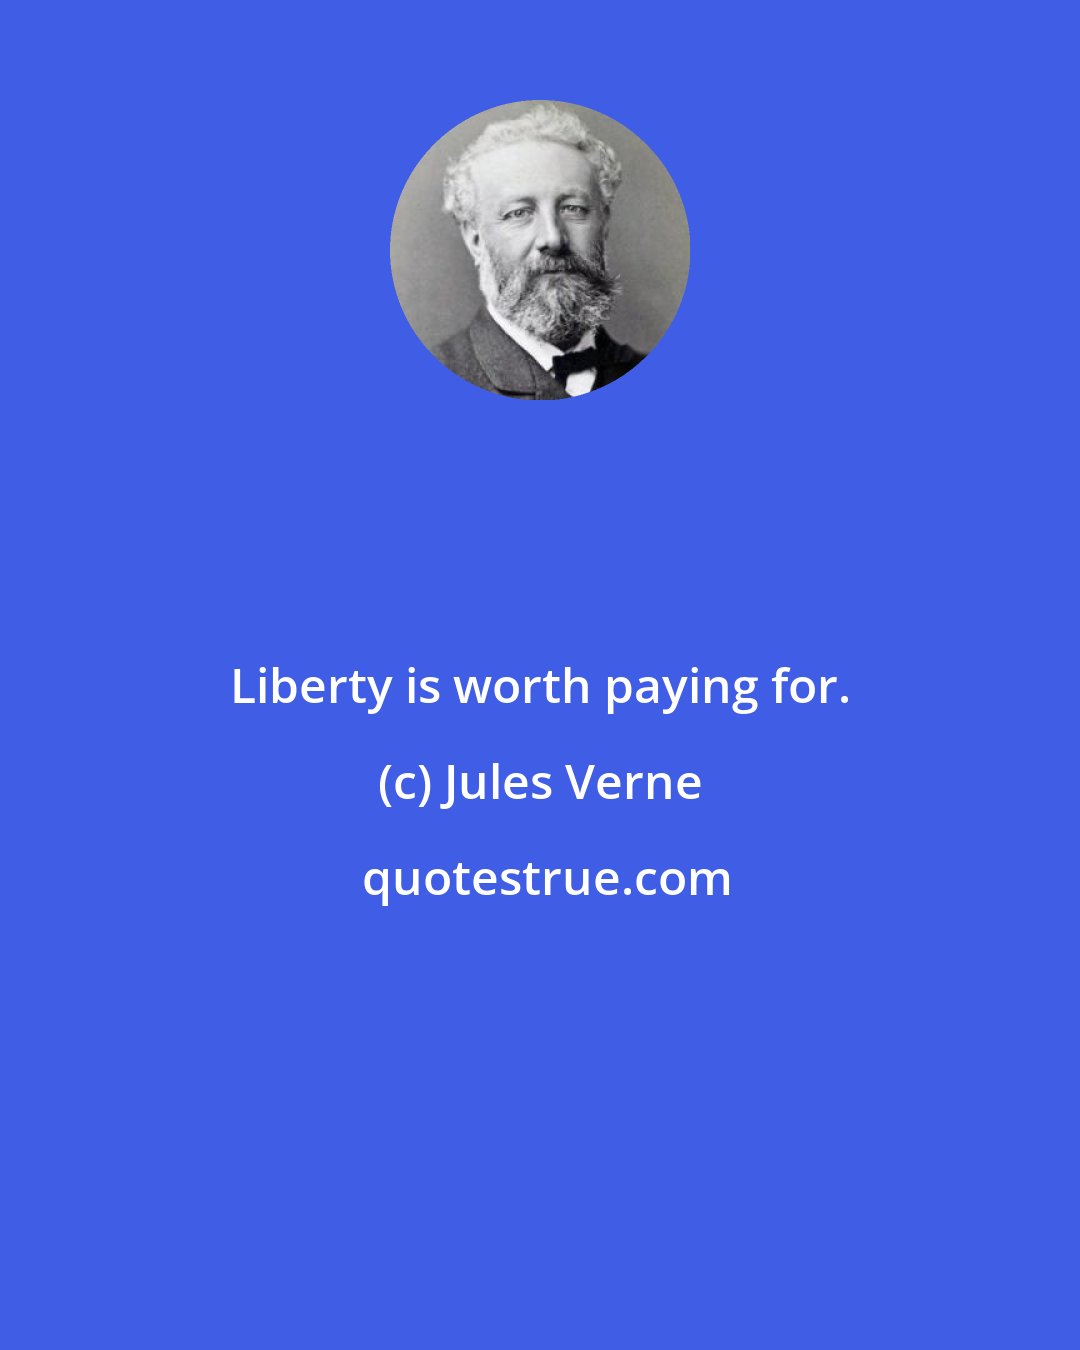 Jules Verne: Liberty is worth paying for.